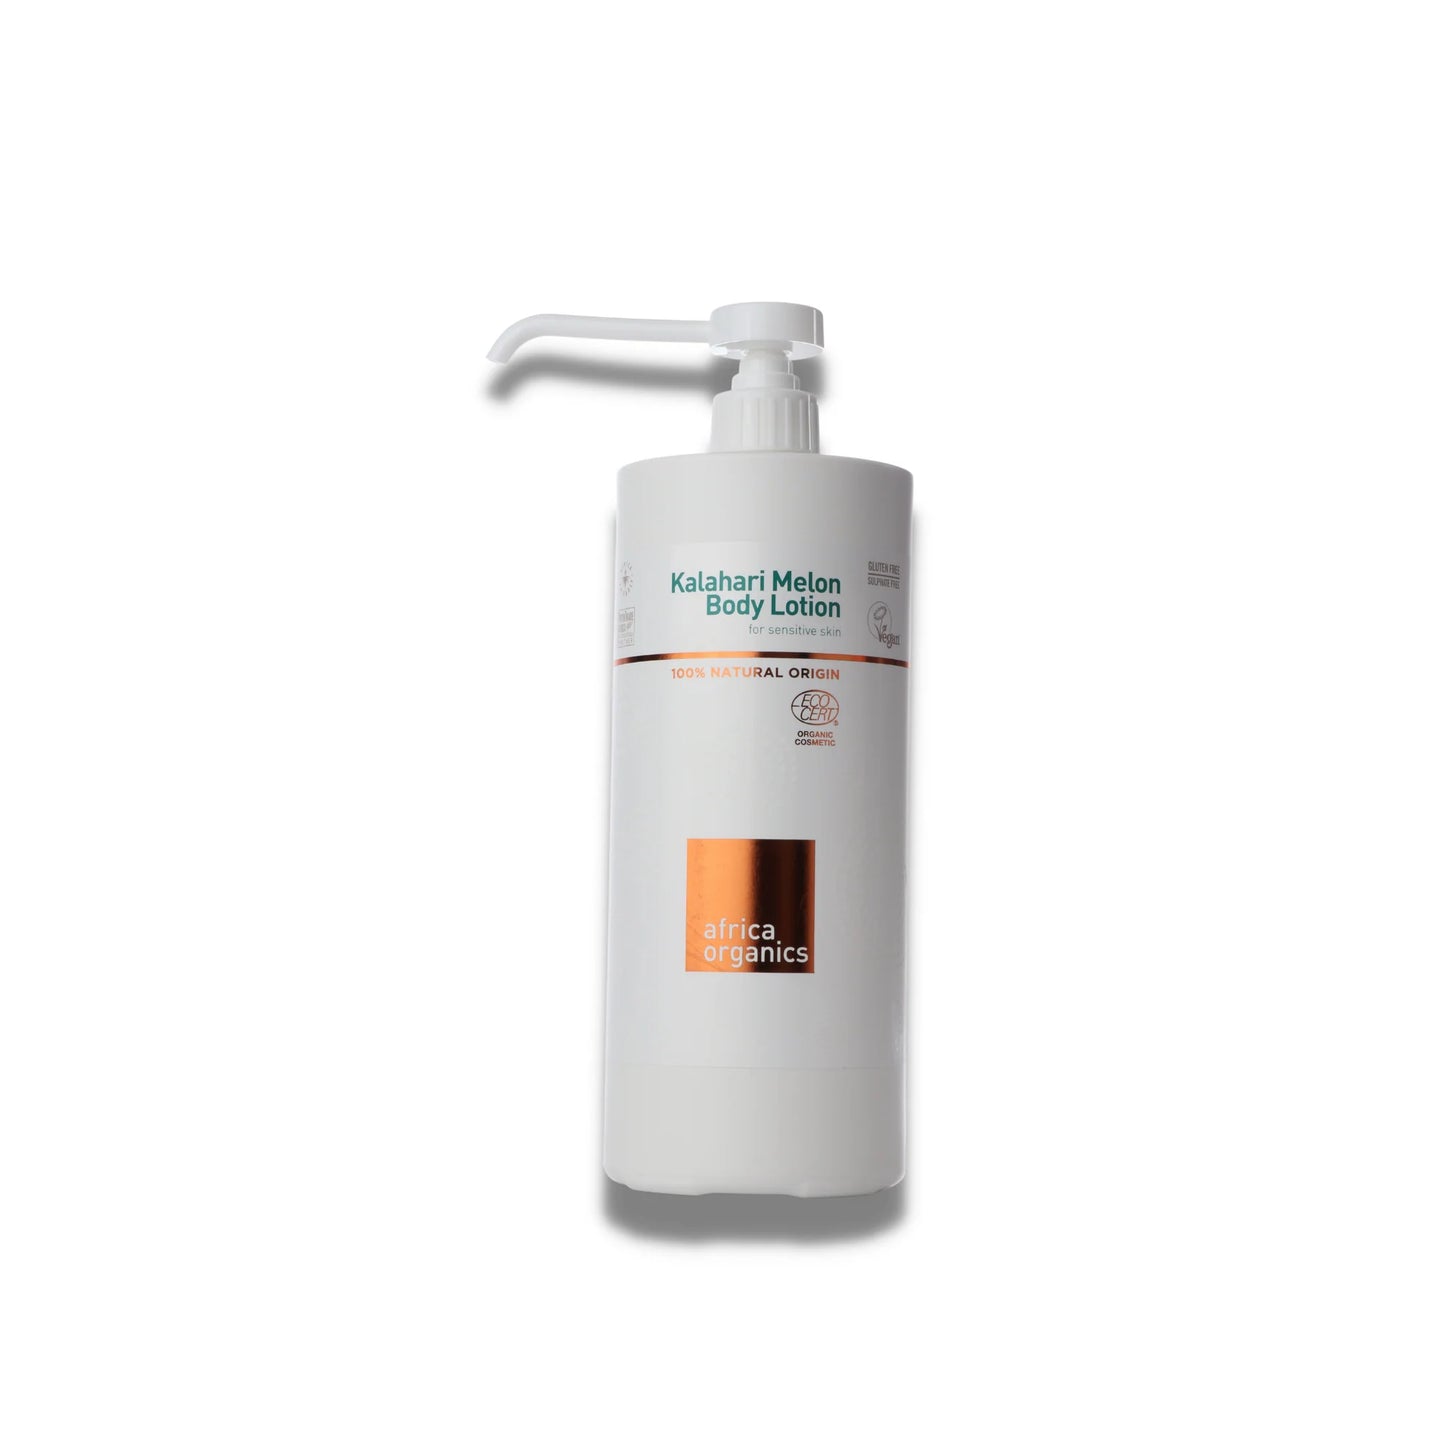 Kalahari Melon body lotion, enriched with natural antioxidants for gentle, moisturized skin.